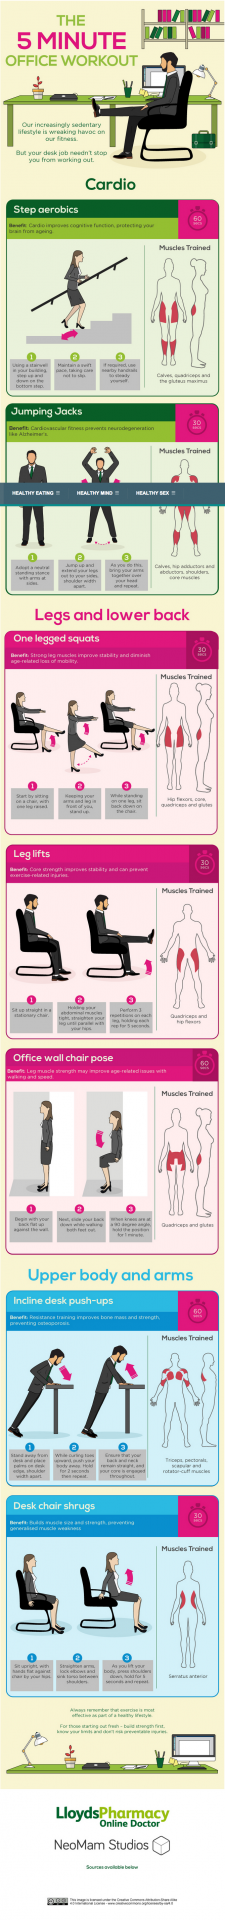 5 Minute Exercise at Work   Everyman Health